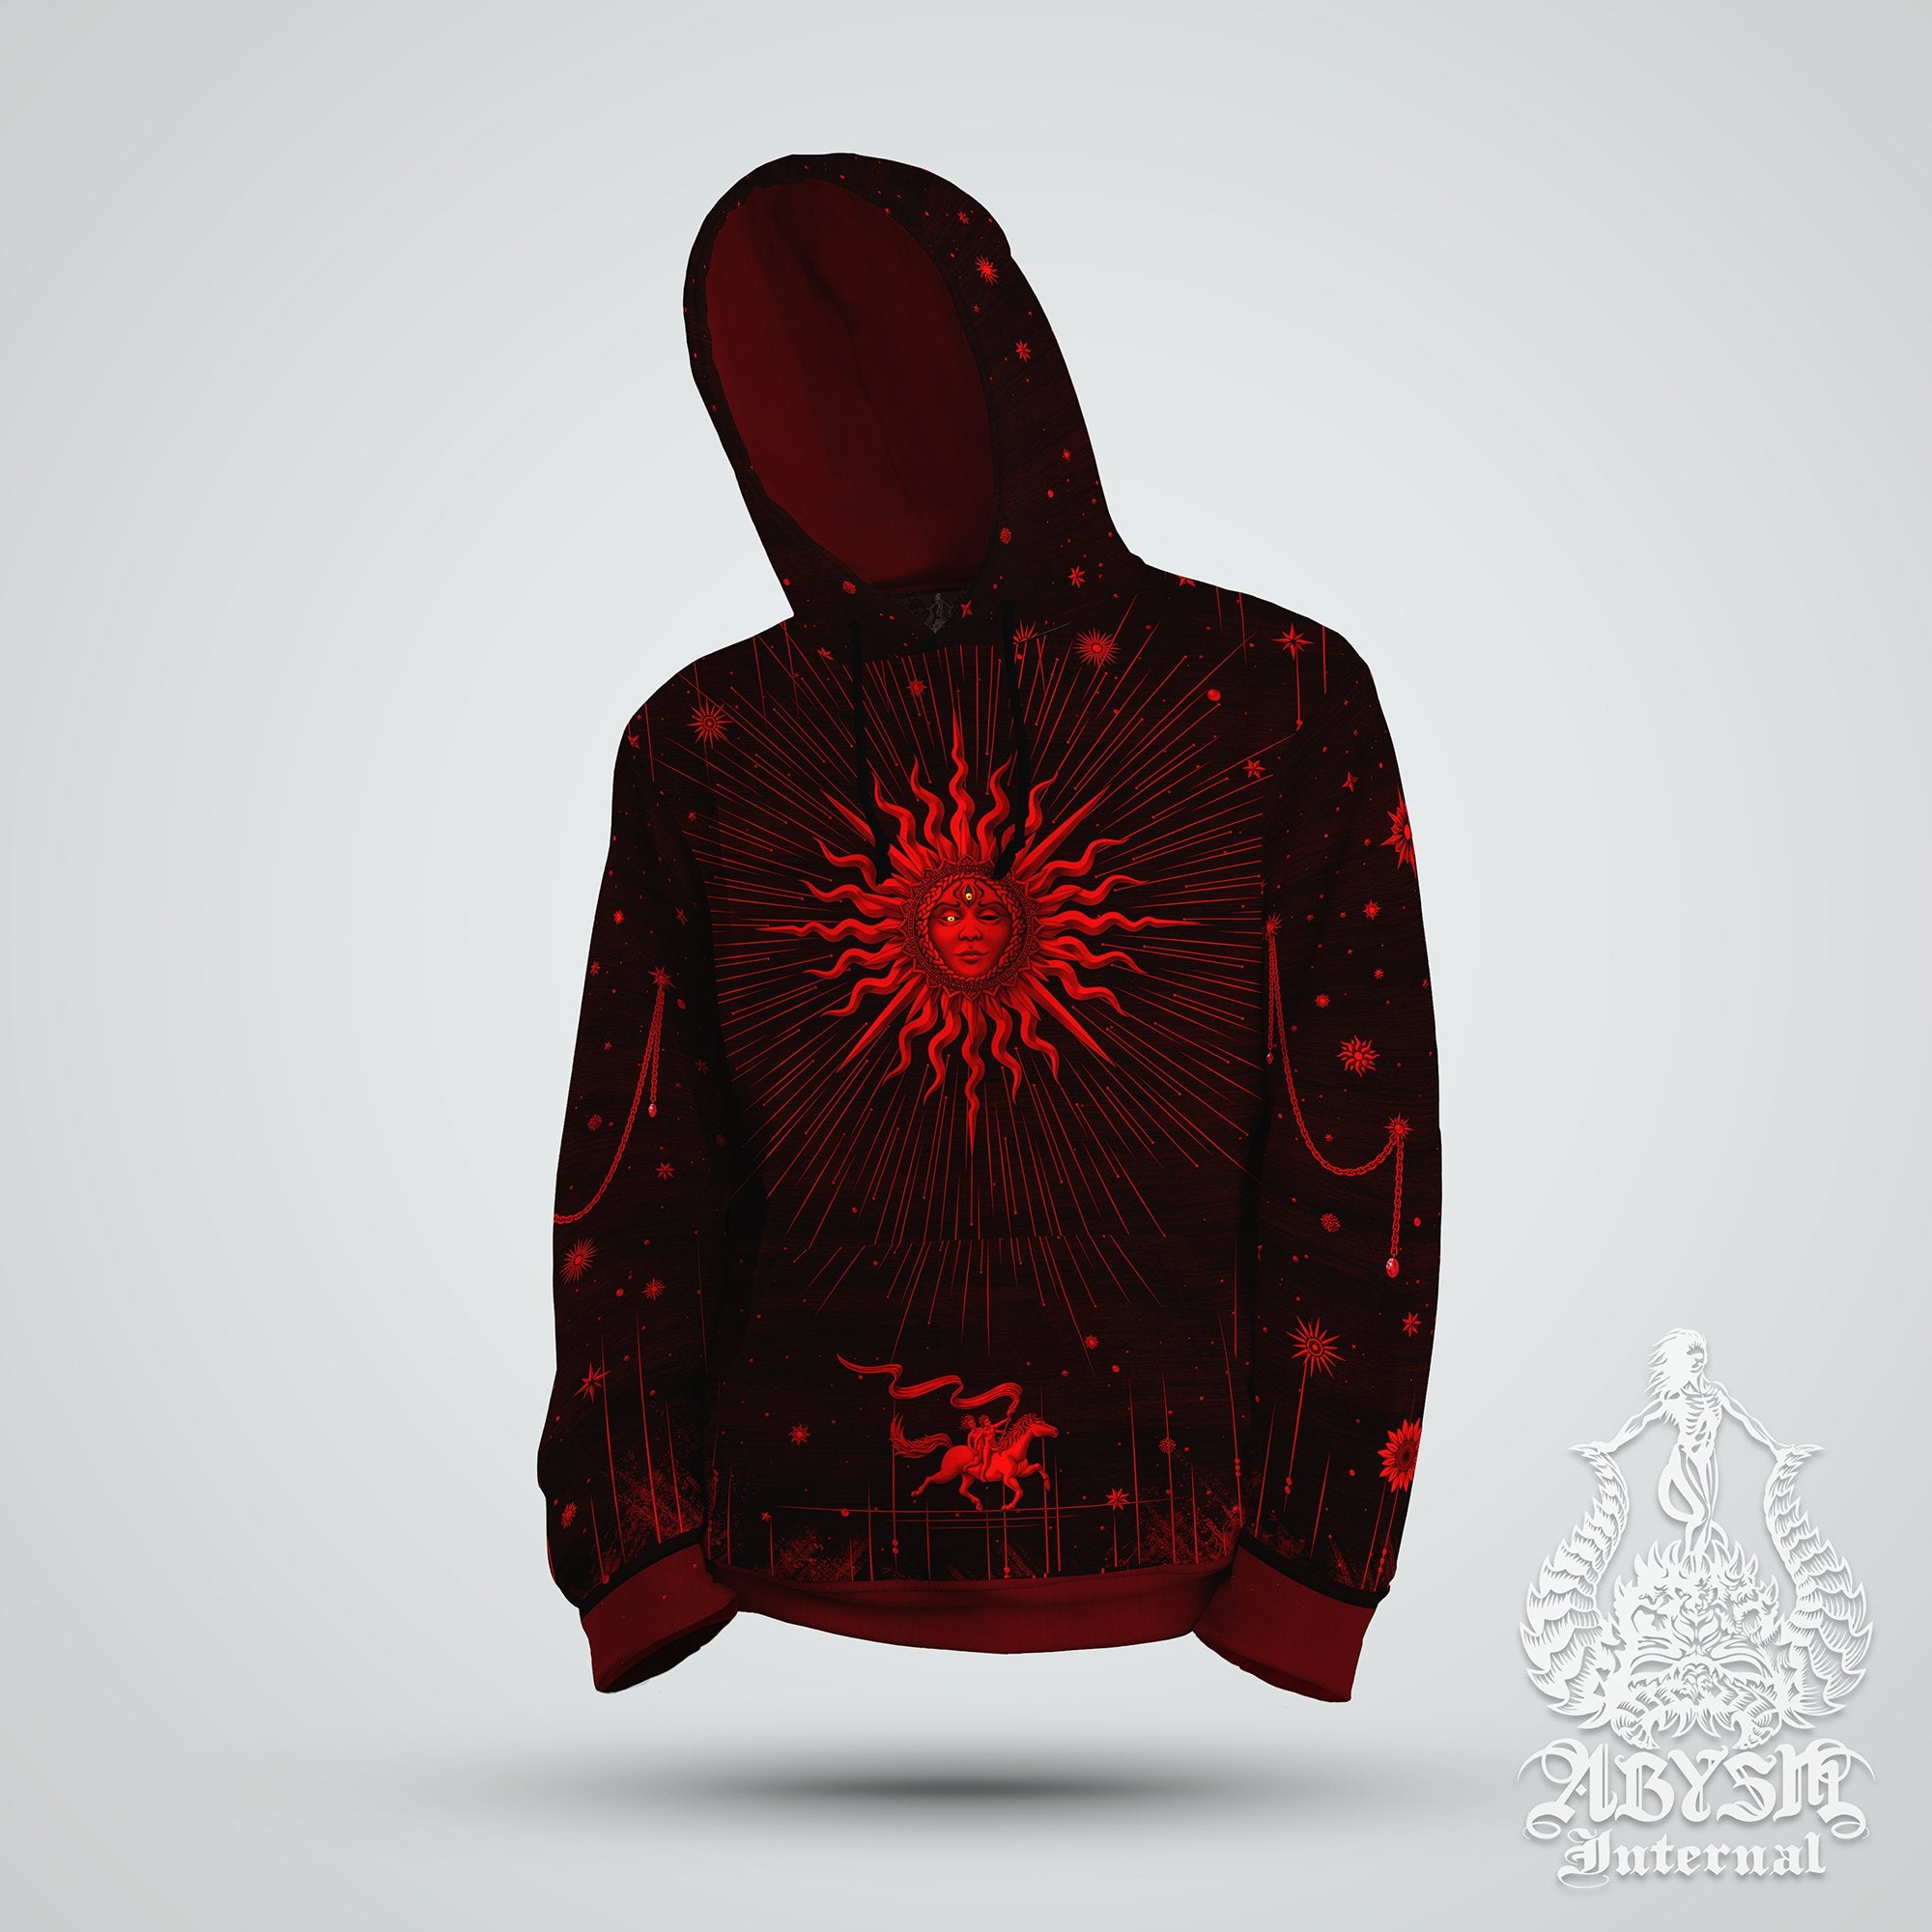 Gothic Red Sun Hoodie, Sorcerer Pullover, Witchy Sweater, Goth Tarot Arcana Outfit, Magic and Esoteric Streetwear, Black Alternative Clothing, Unisex - Abysm Internal